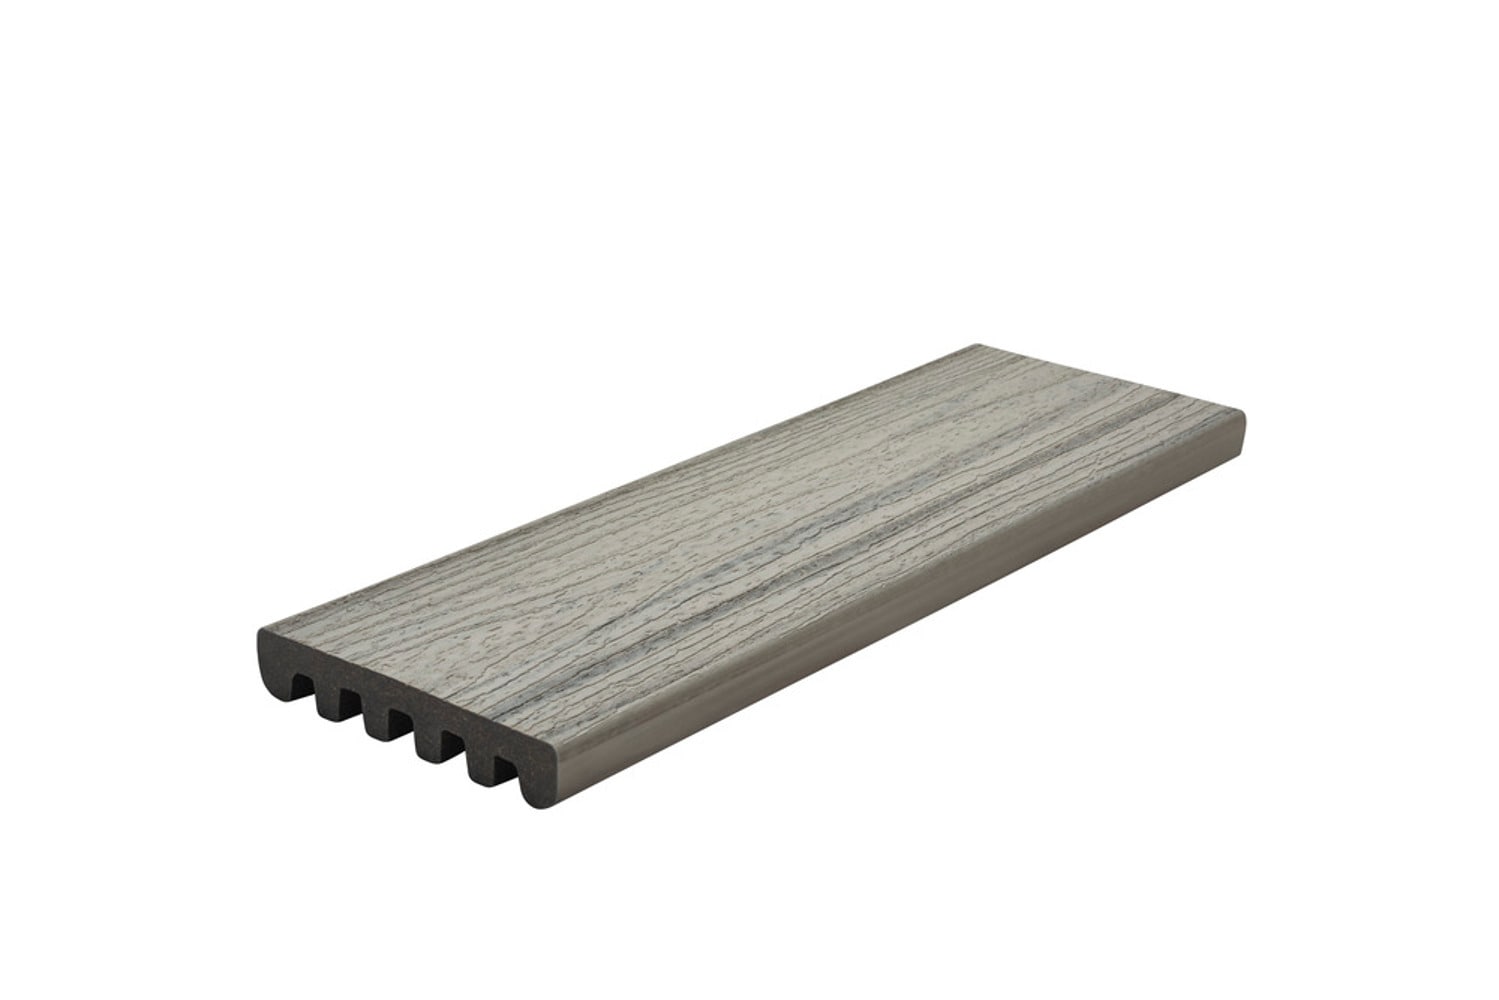 Enhance Naturals 1-in x 6-in x 12-ft Foggy Wharf Square Composite Deck Board in Gray | - Trex FW010612E2S01